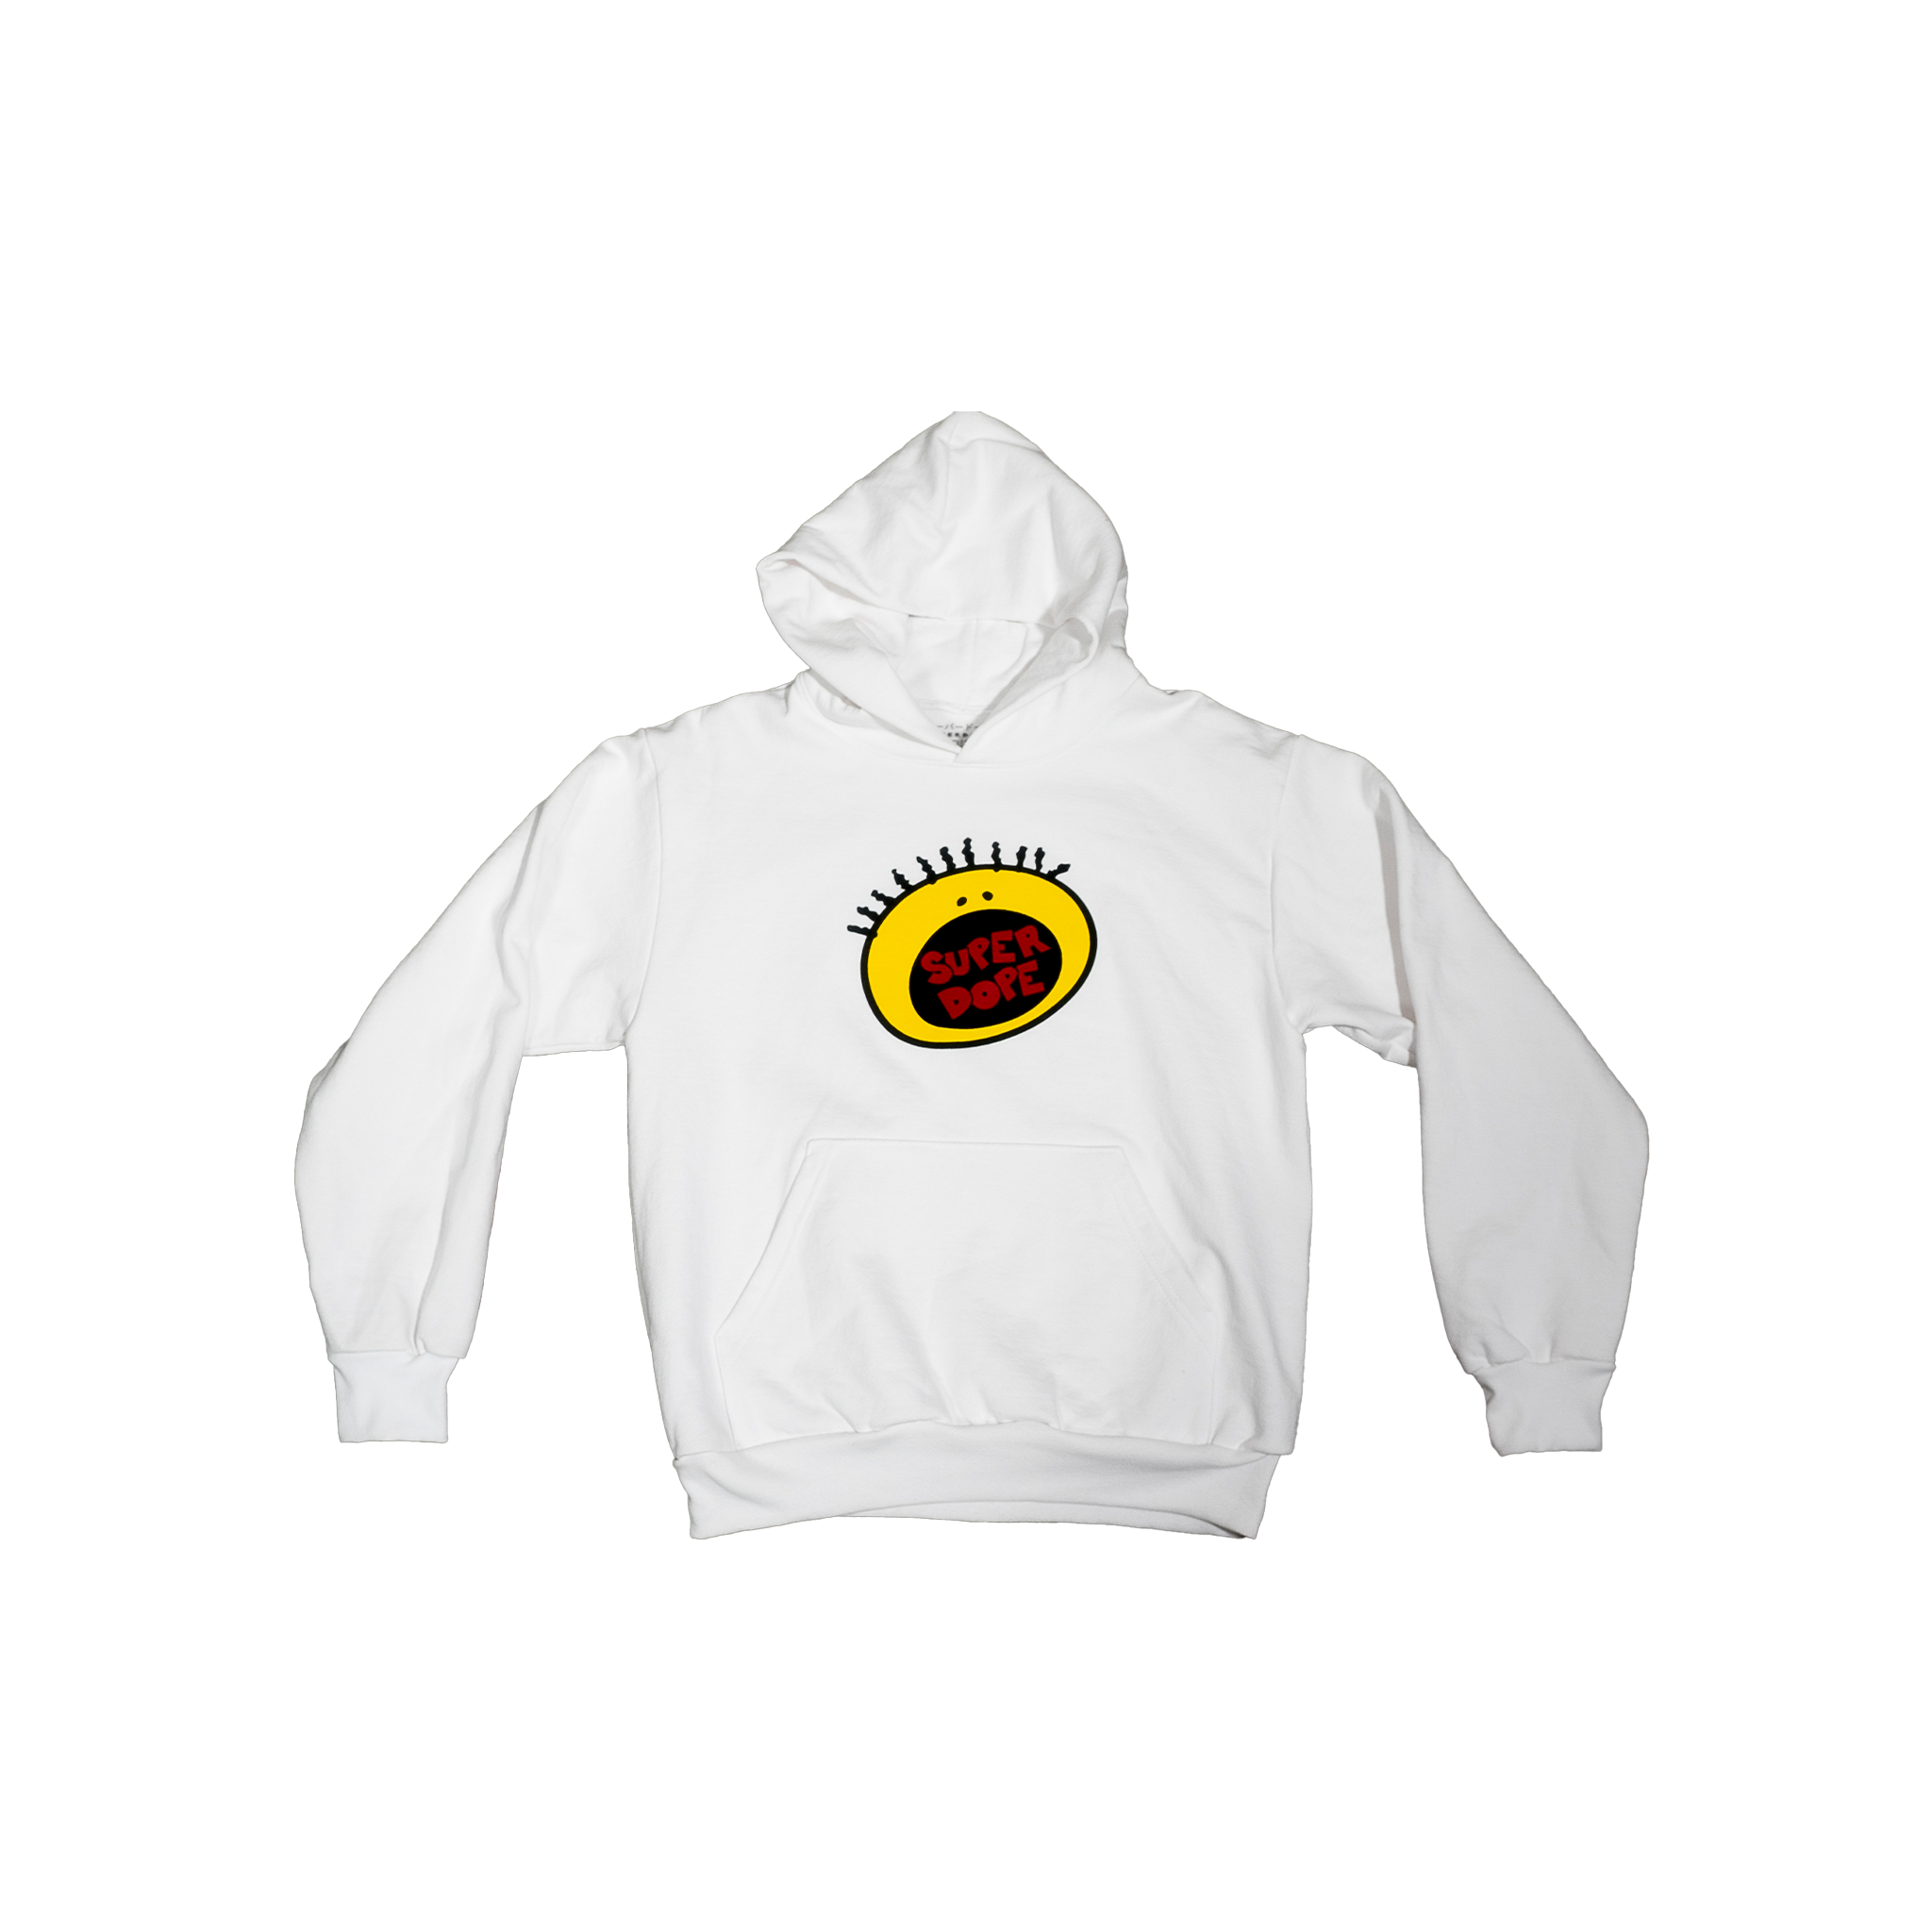 SUPER DOPE "All That" Hoody